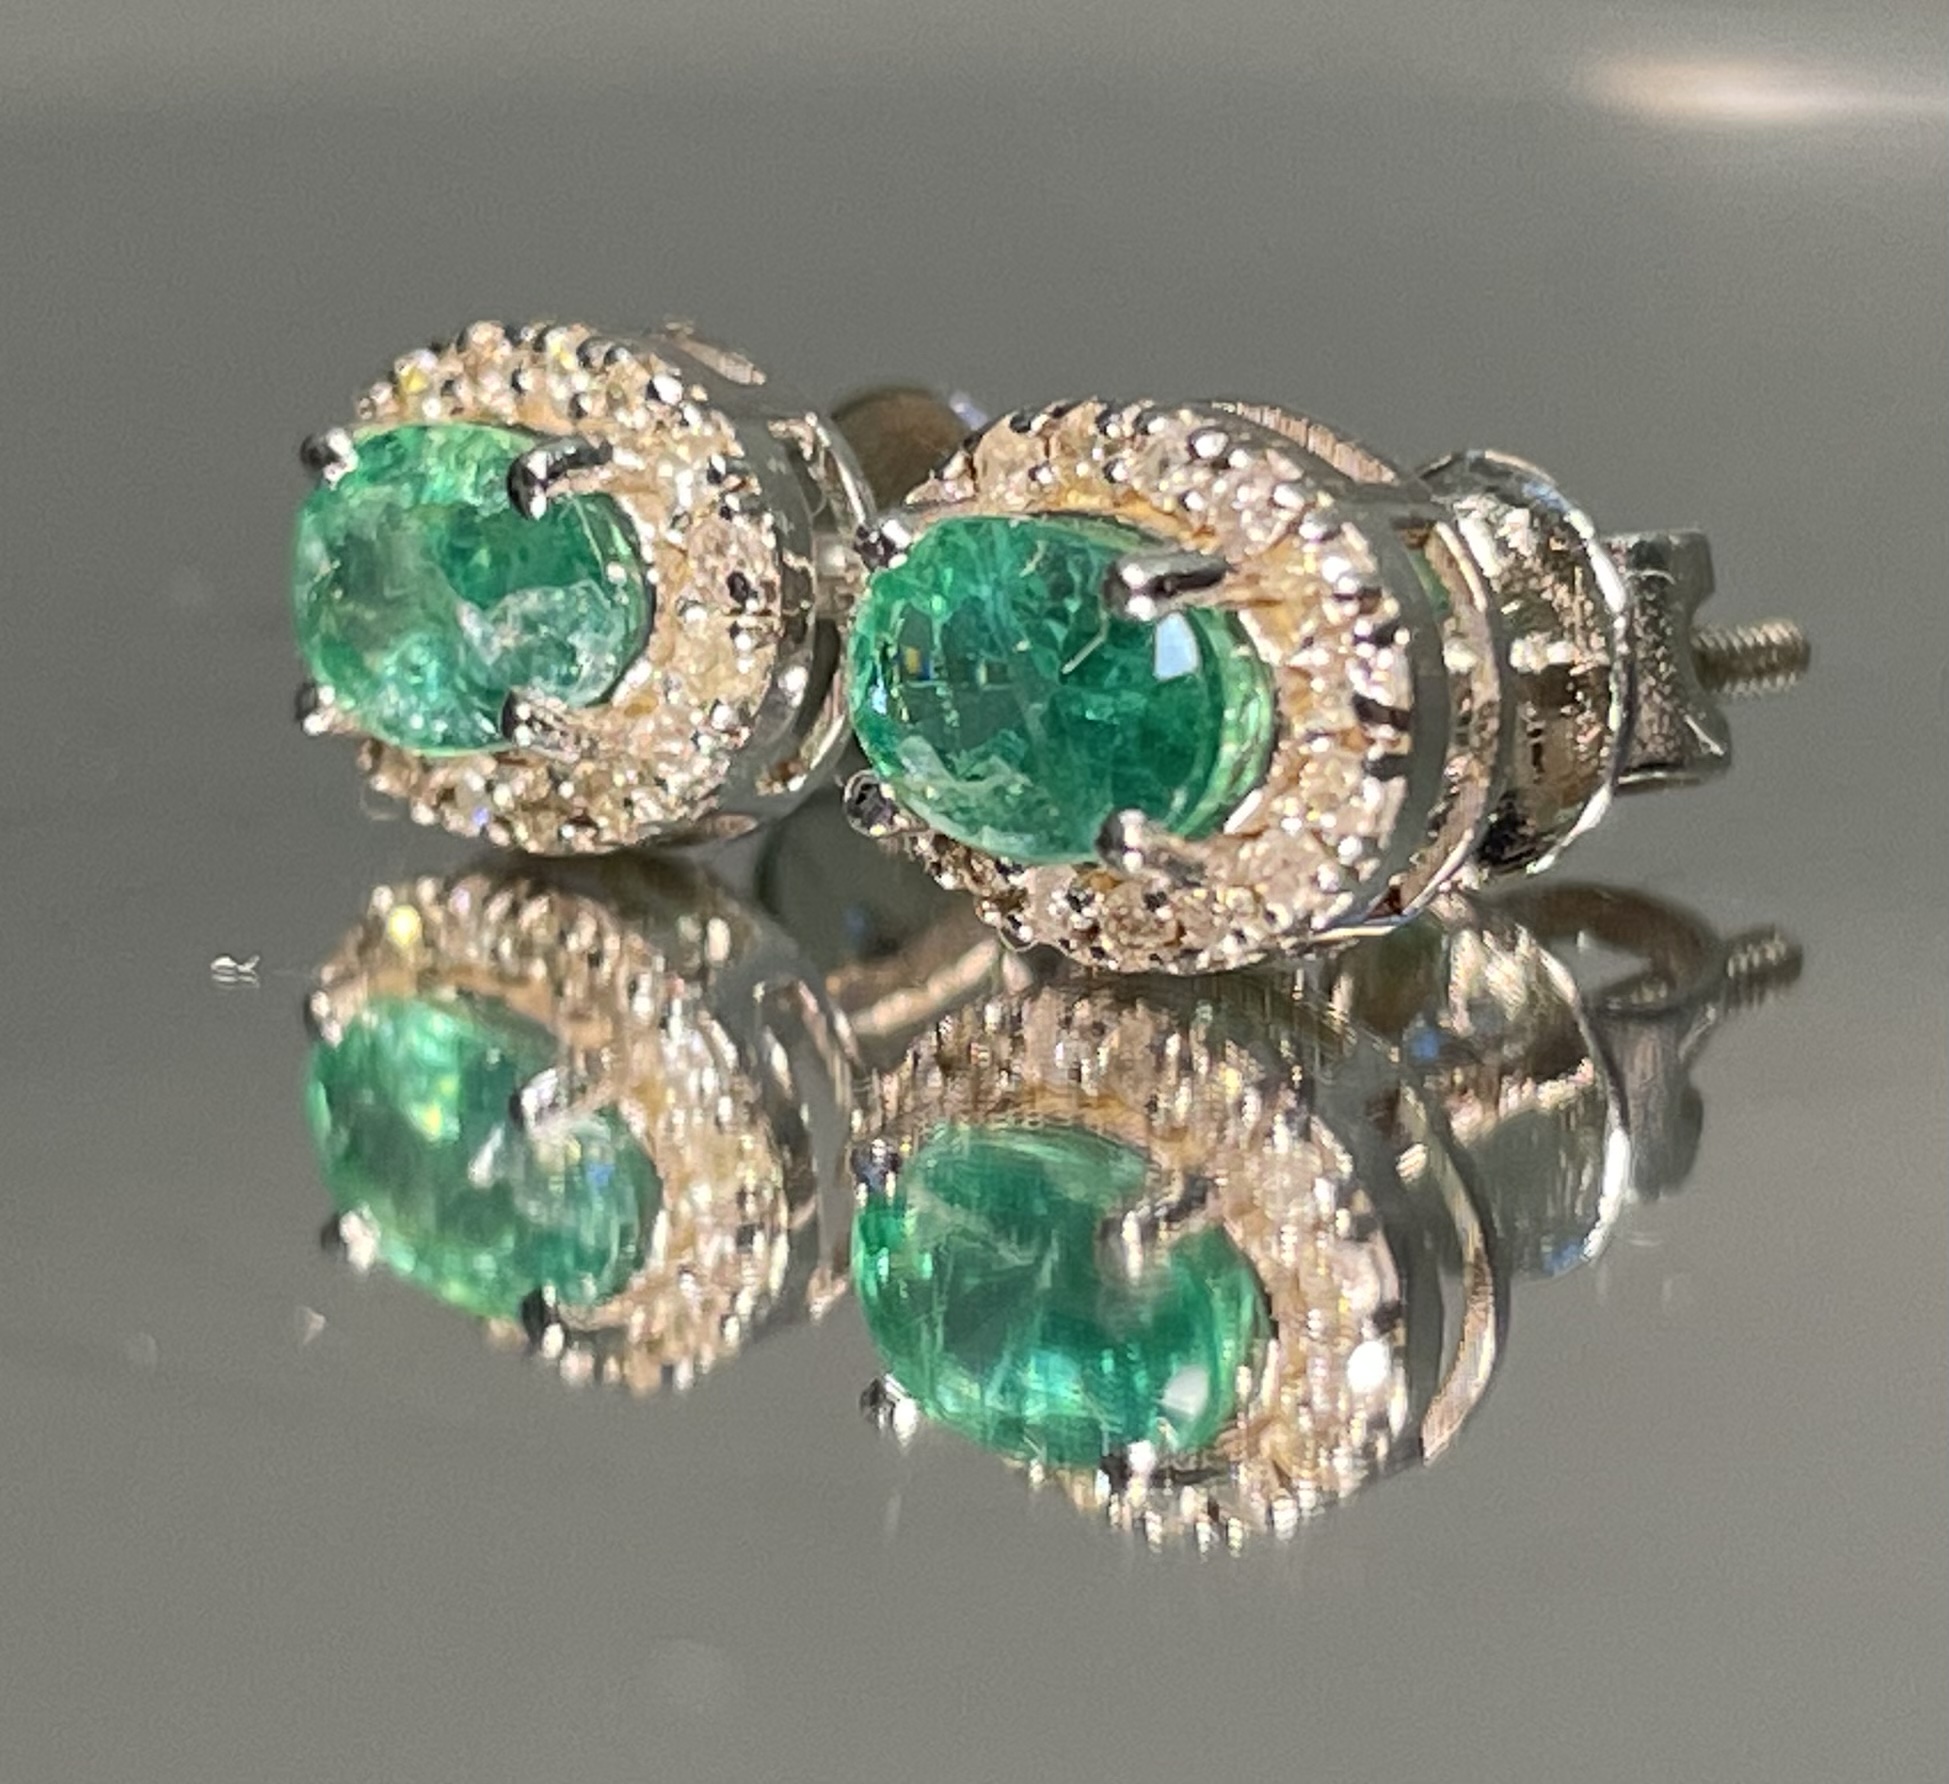 Beautiful Natural Emerald Halo Set Stud Earrings 18k White Gold - Image 5 of 7